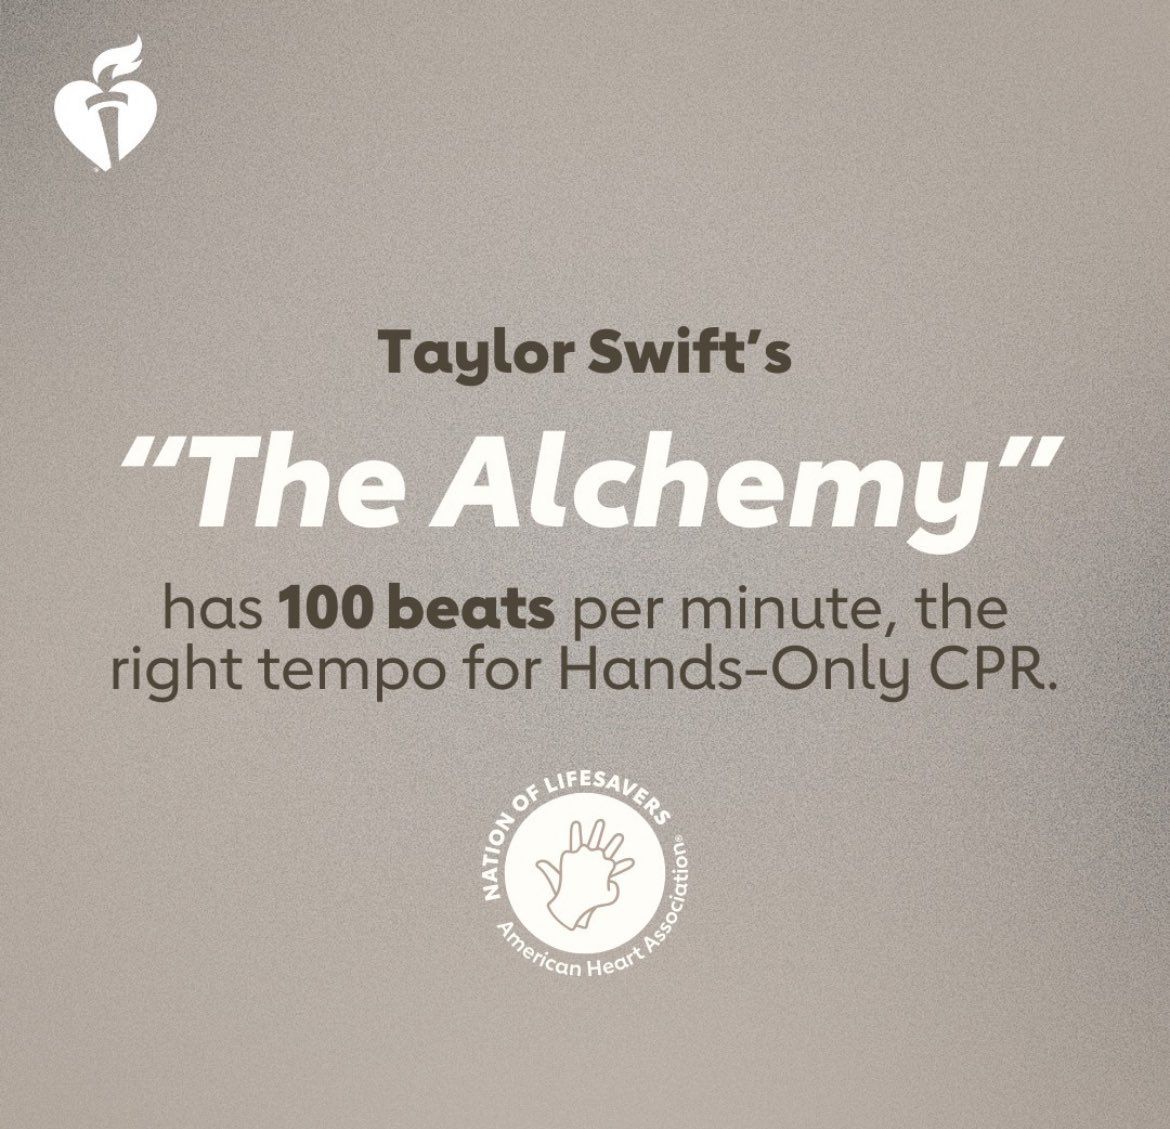 📲| 'The Alchemy' by Taylor Swift has the right tempo for hands CPR